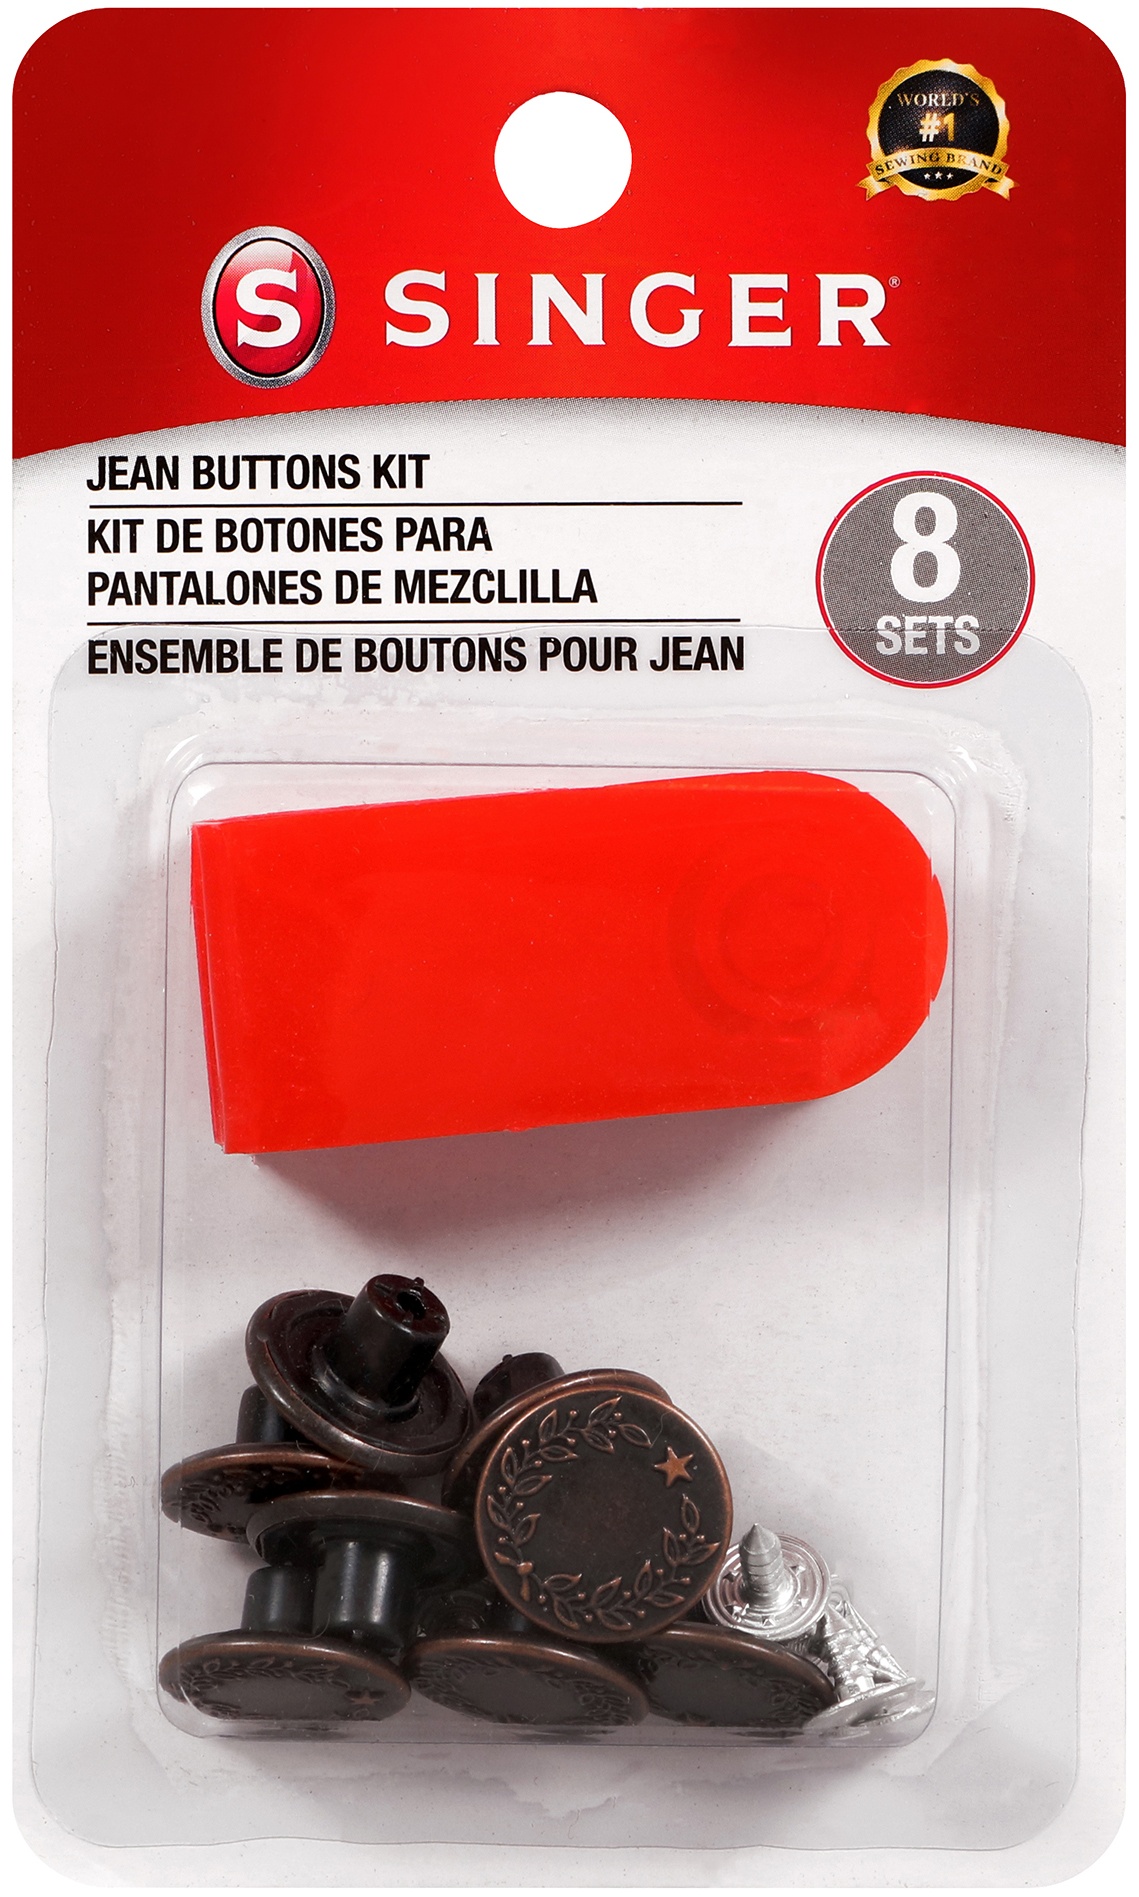 Singer No Sew Jean Buttons Kit with Tool 8 Sets